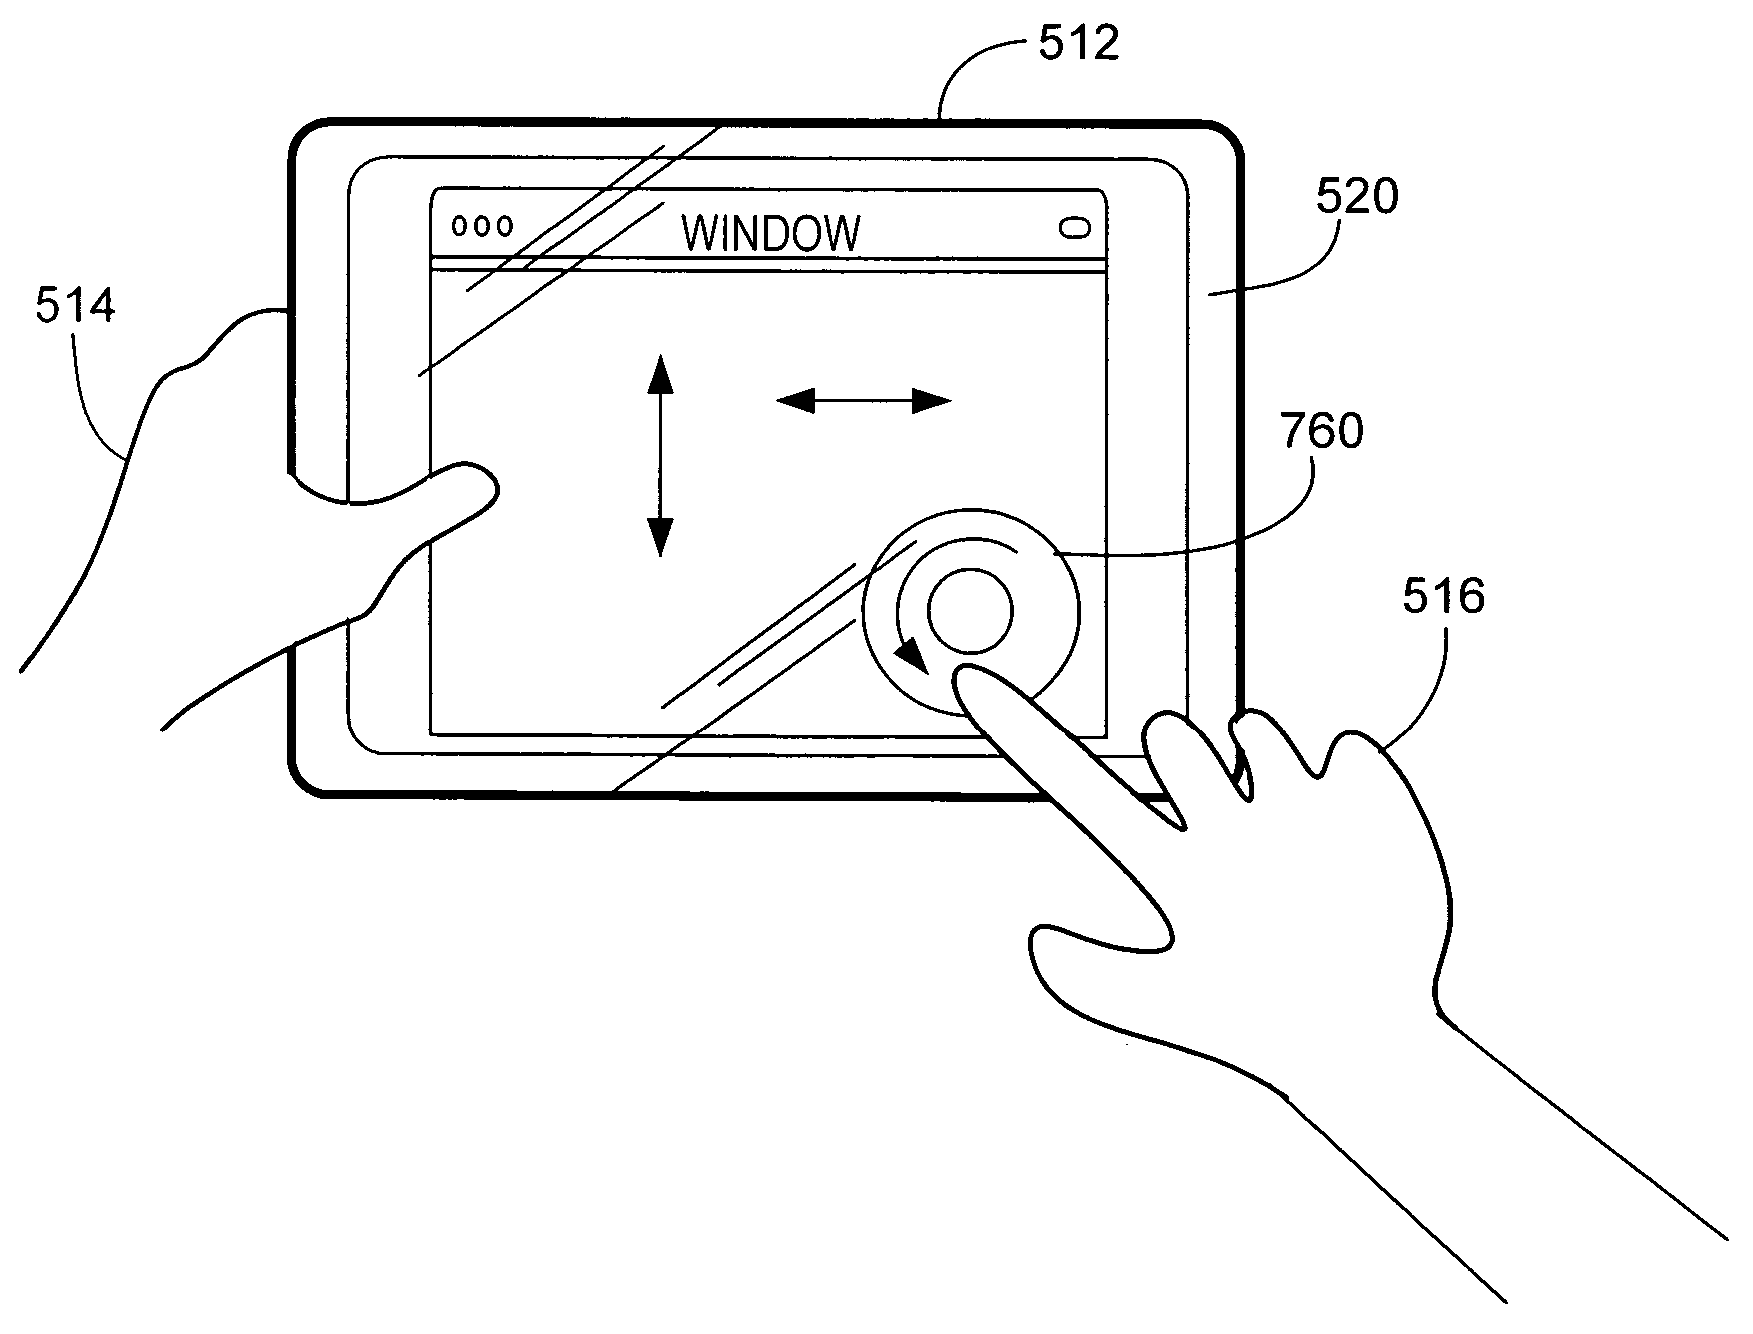 Gestures for touch sensitive input devices